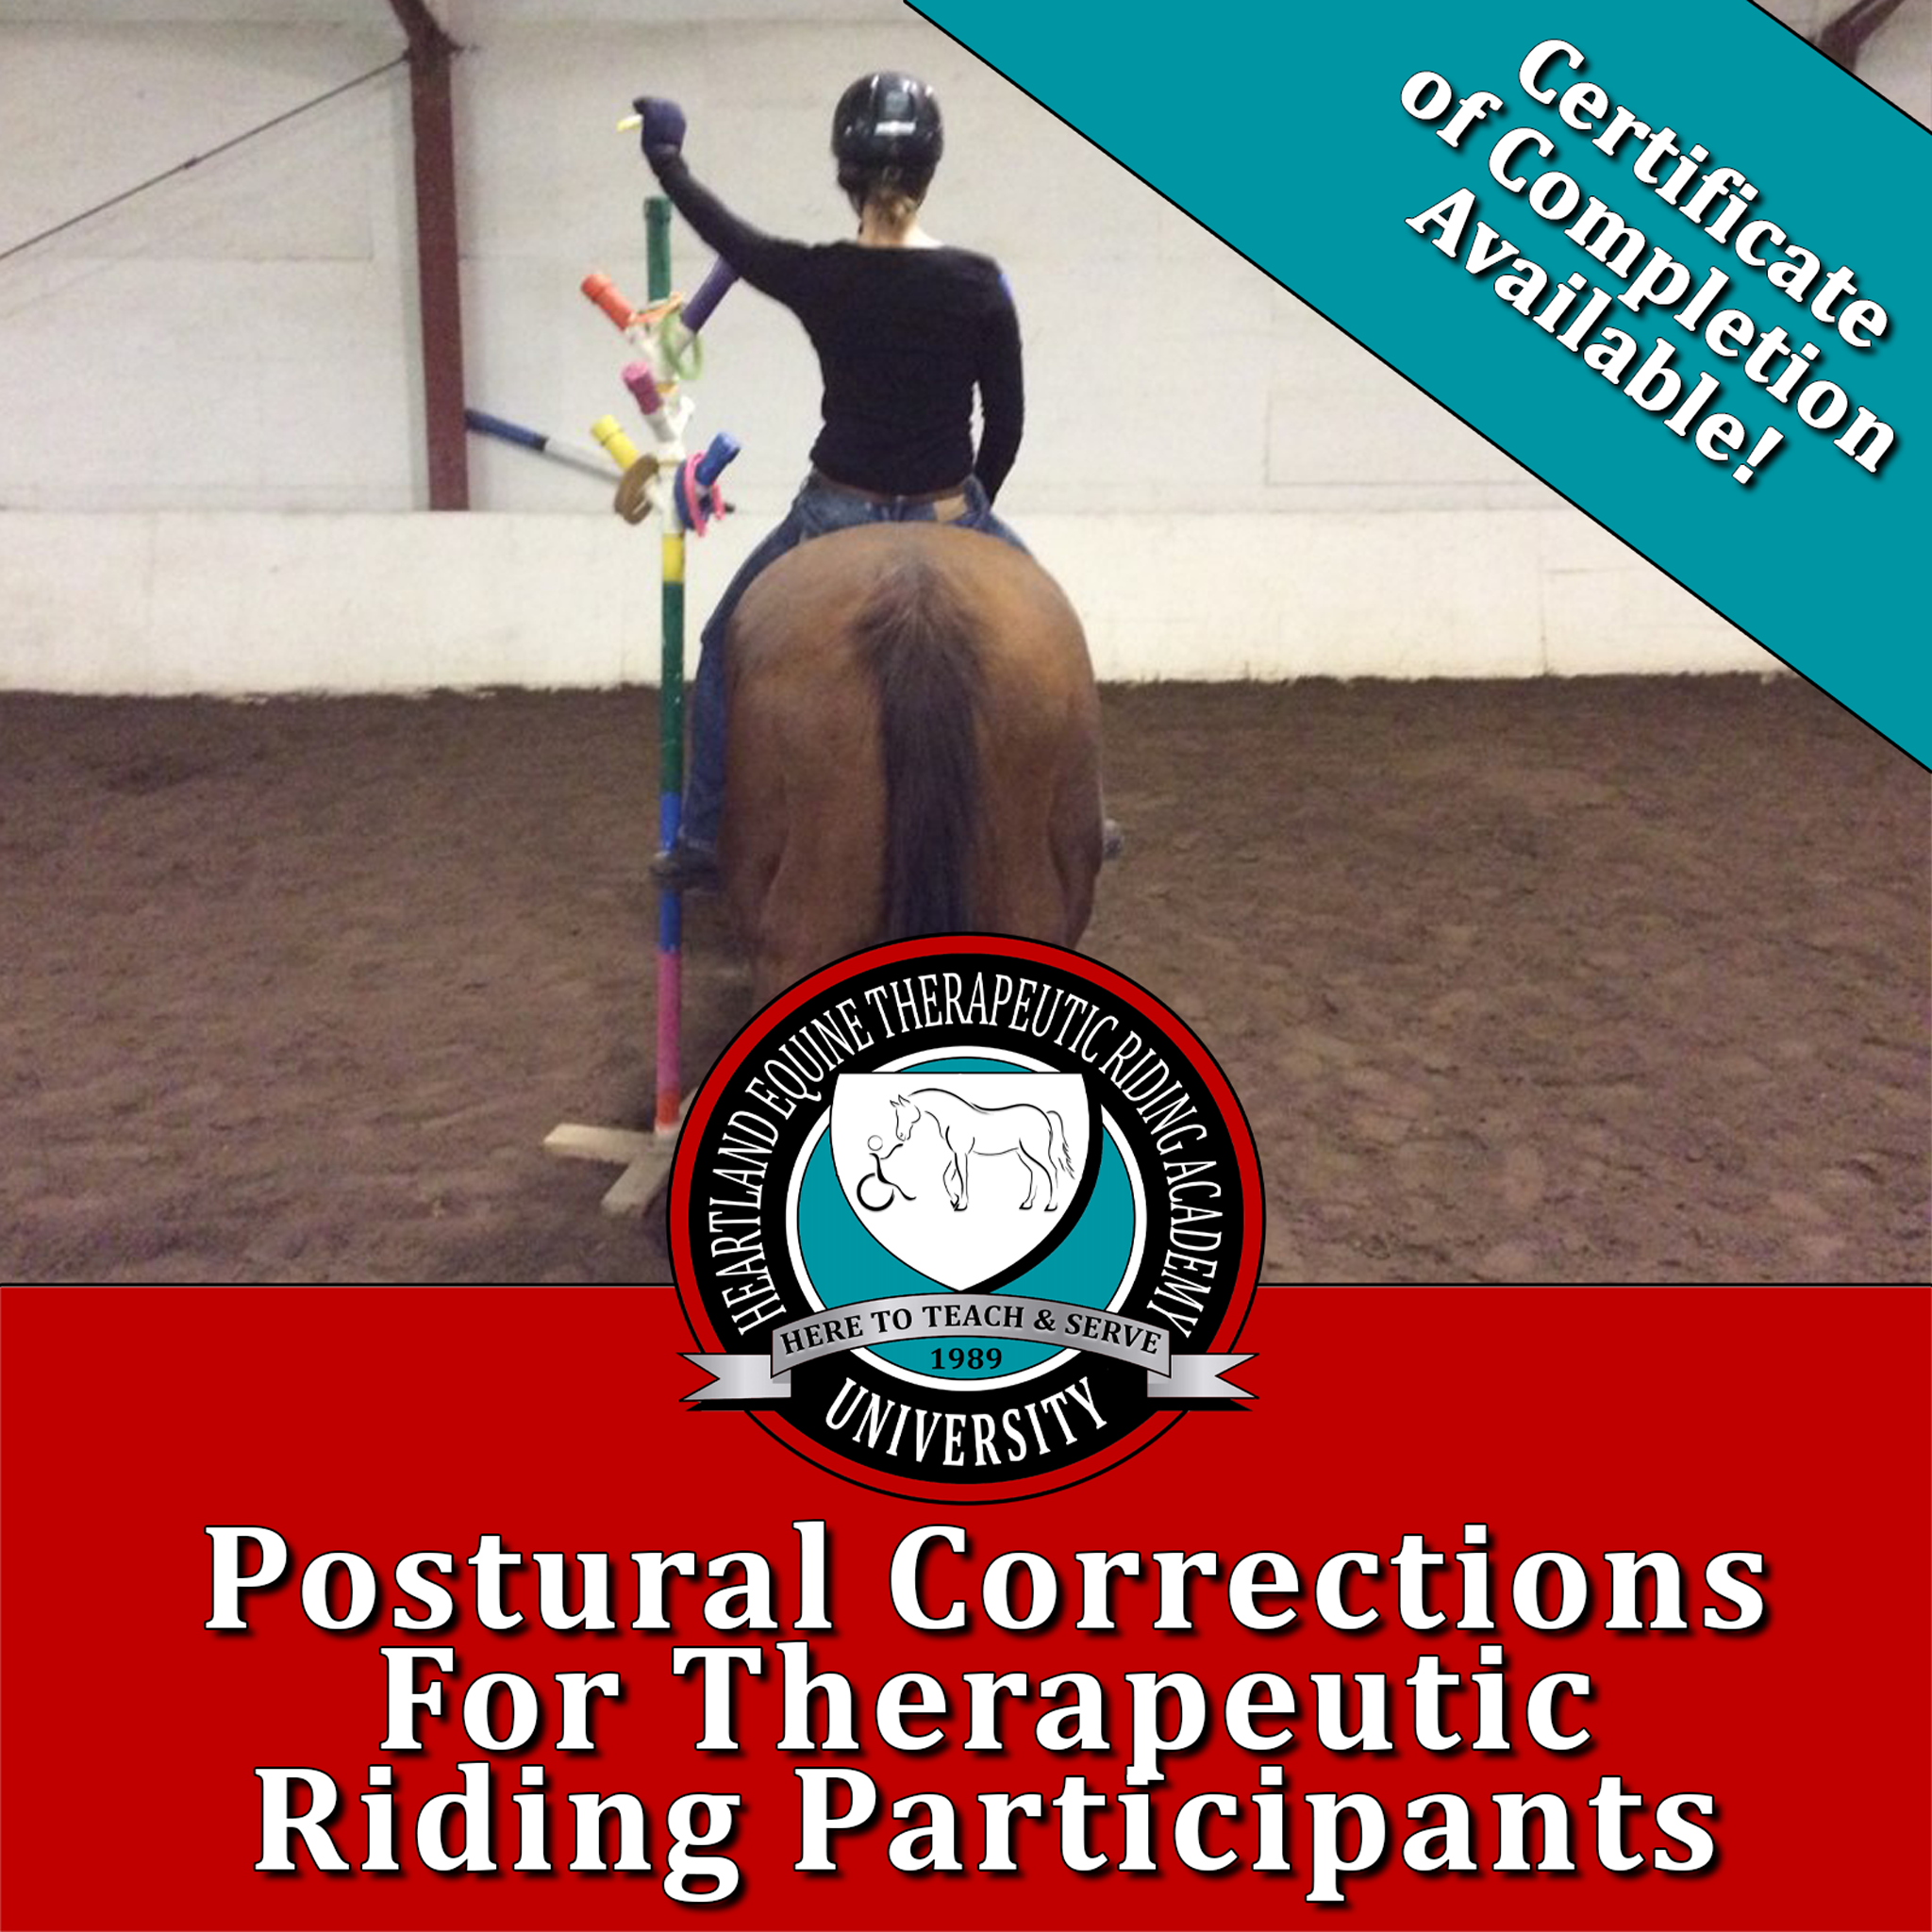 Postural Corrections for Therapeutic Riding Participants